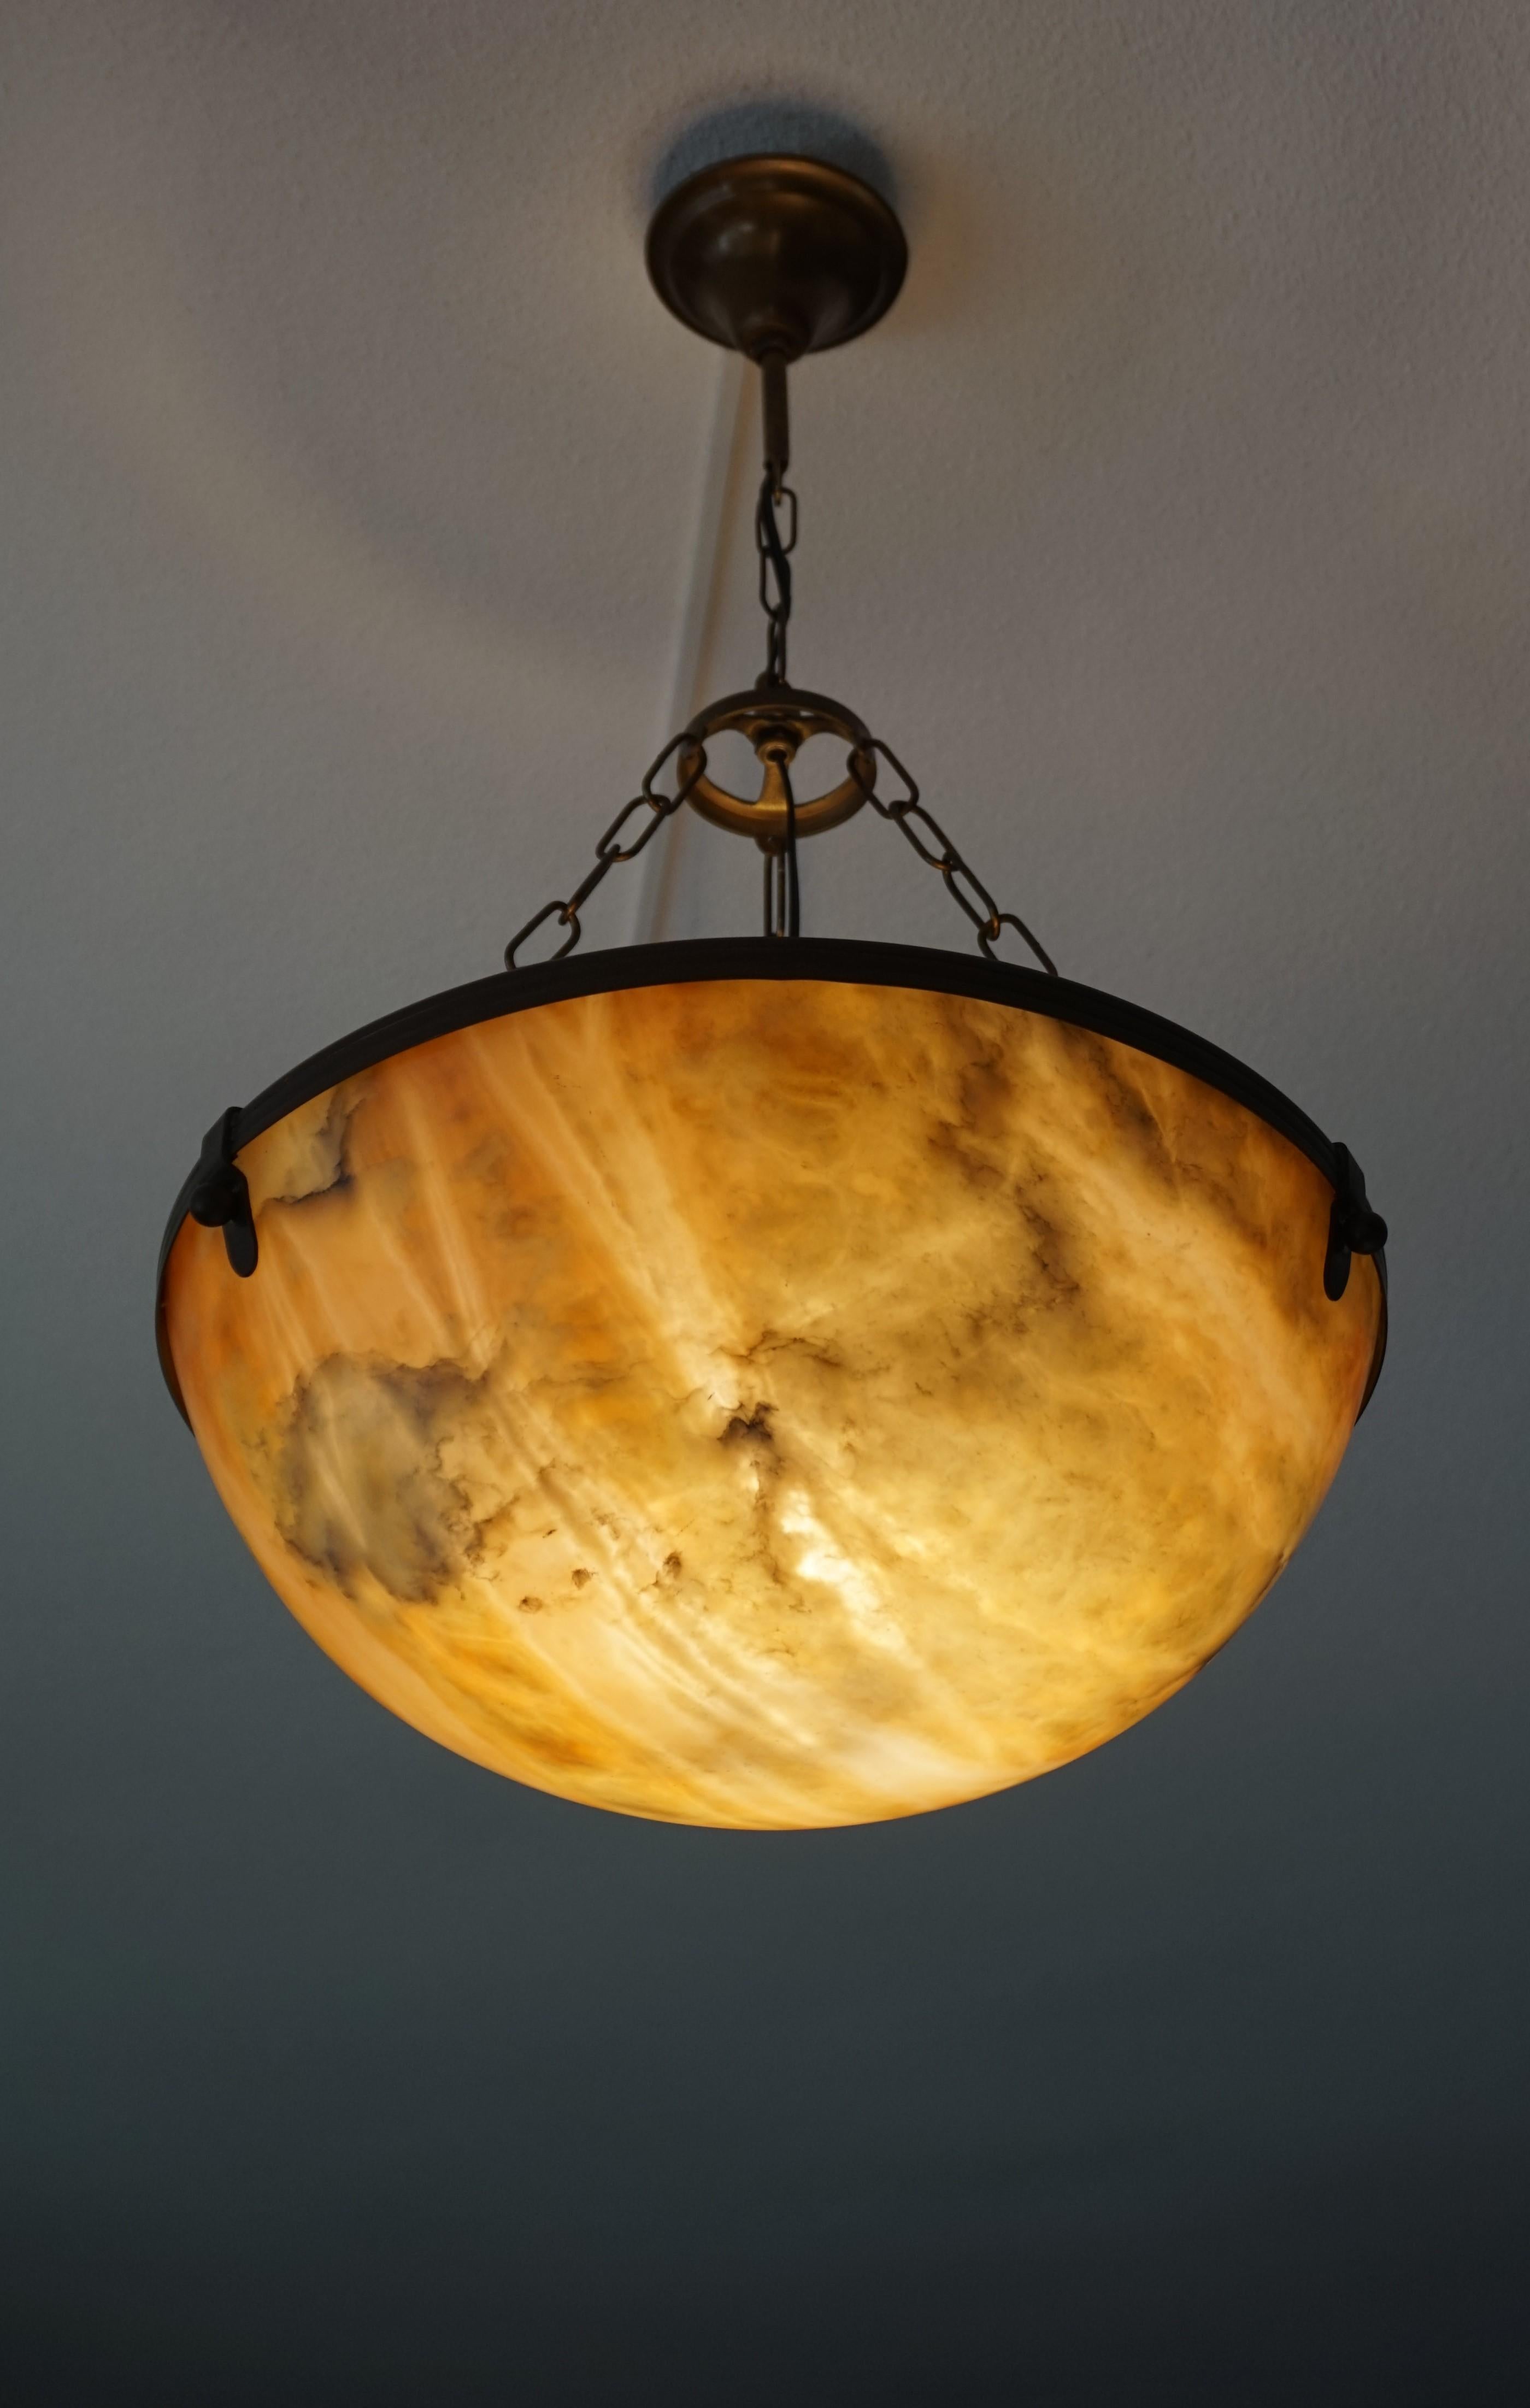 Stylish and excellent condition alabaster in brass frame light fixture.

If you are looking for a beautiful and stylish light to grace your living space then this early 1900s, mineral stone pendant could be the one. All handcrafted in the Arts &